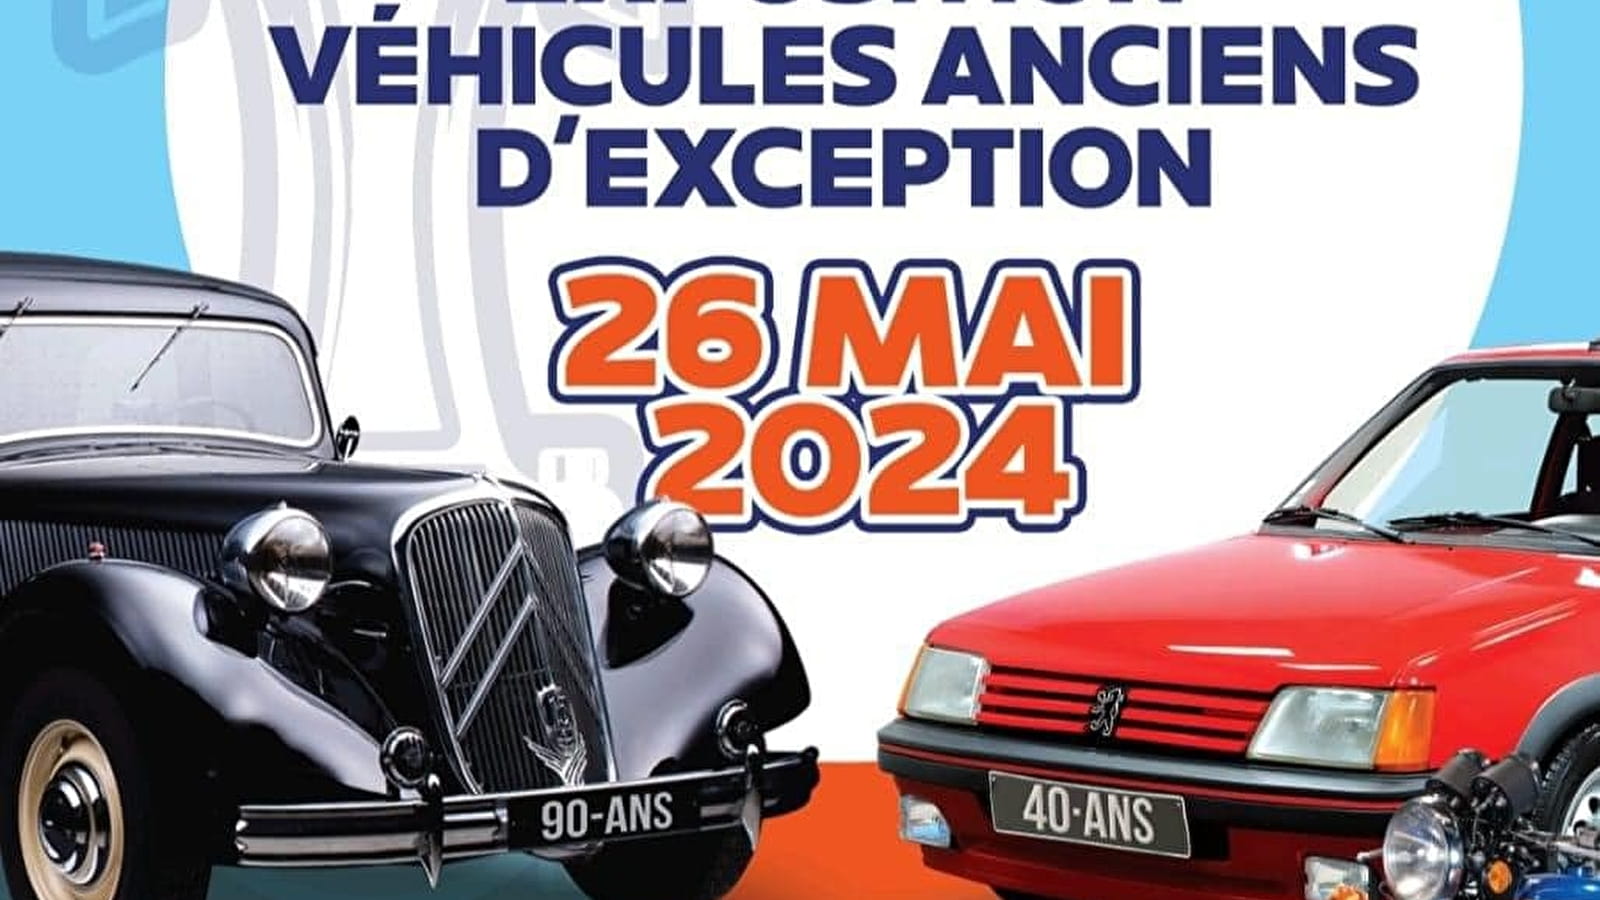 Exhibition of exceptional old vehicles